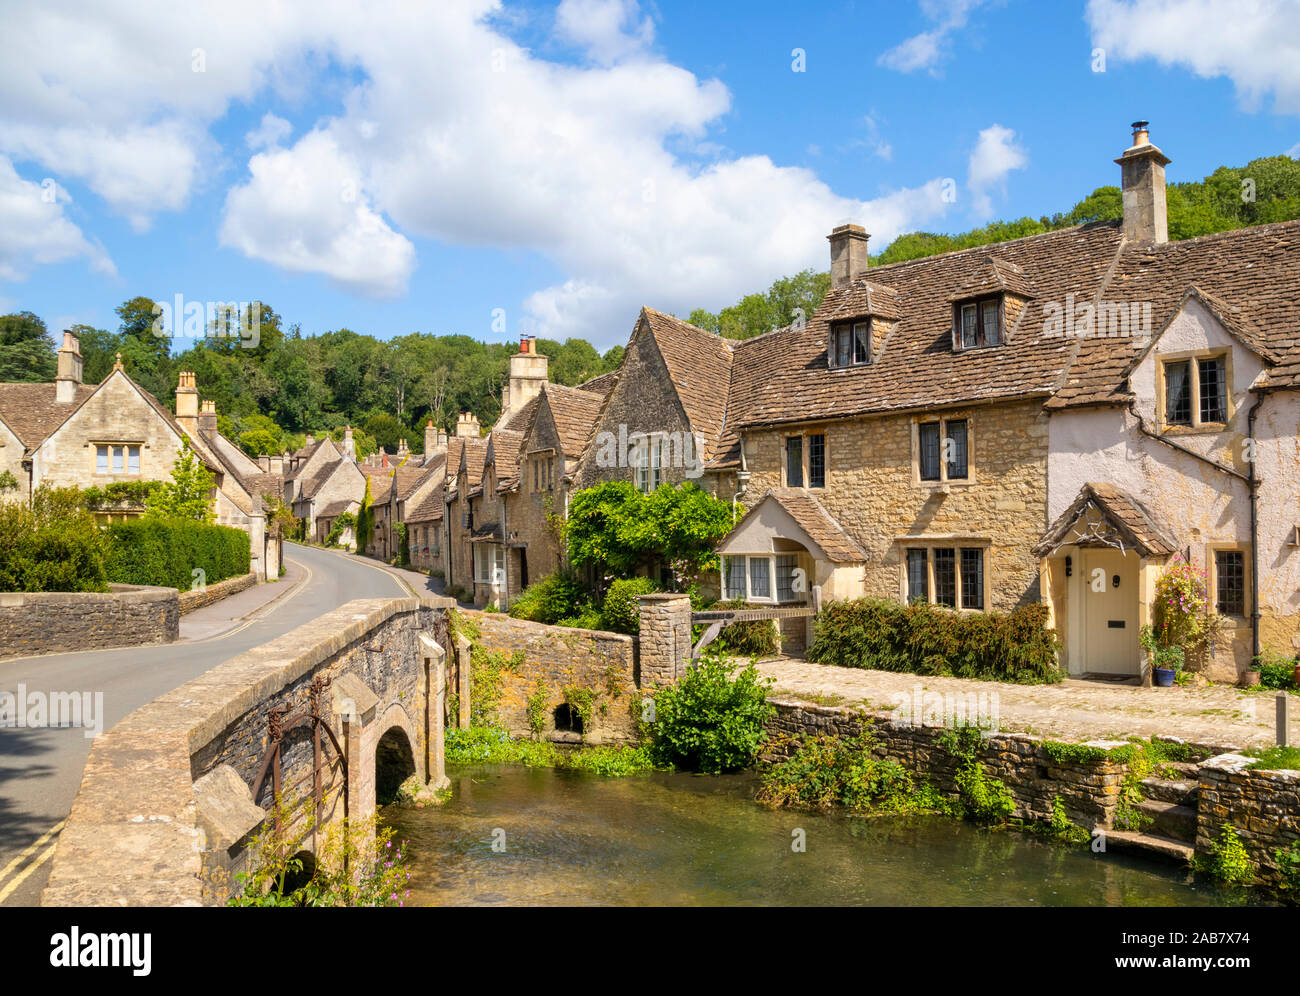 Water Lane with bridge over By Brook on to The Street, Castle Combe village, Castle Combe, Cotswolds, Wiltshire, England, United Kingdom, Europe Stock Photo